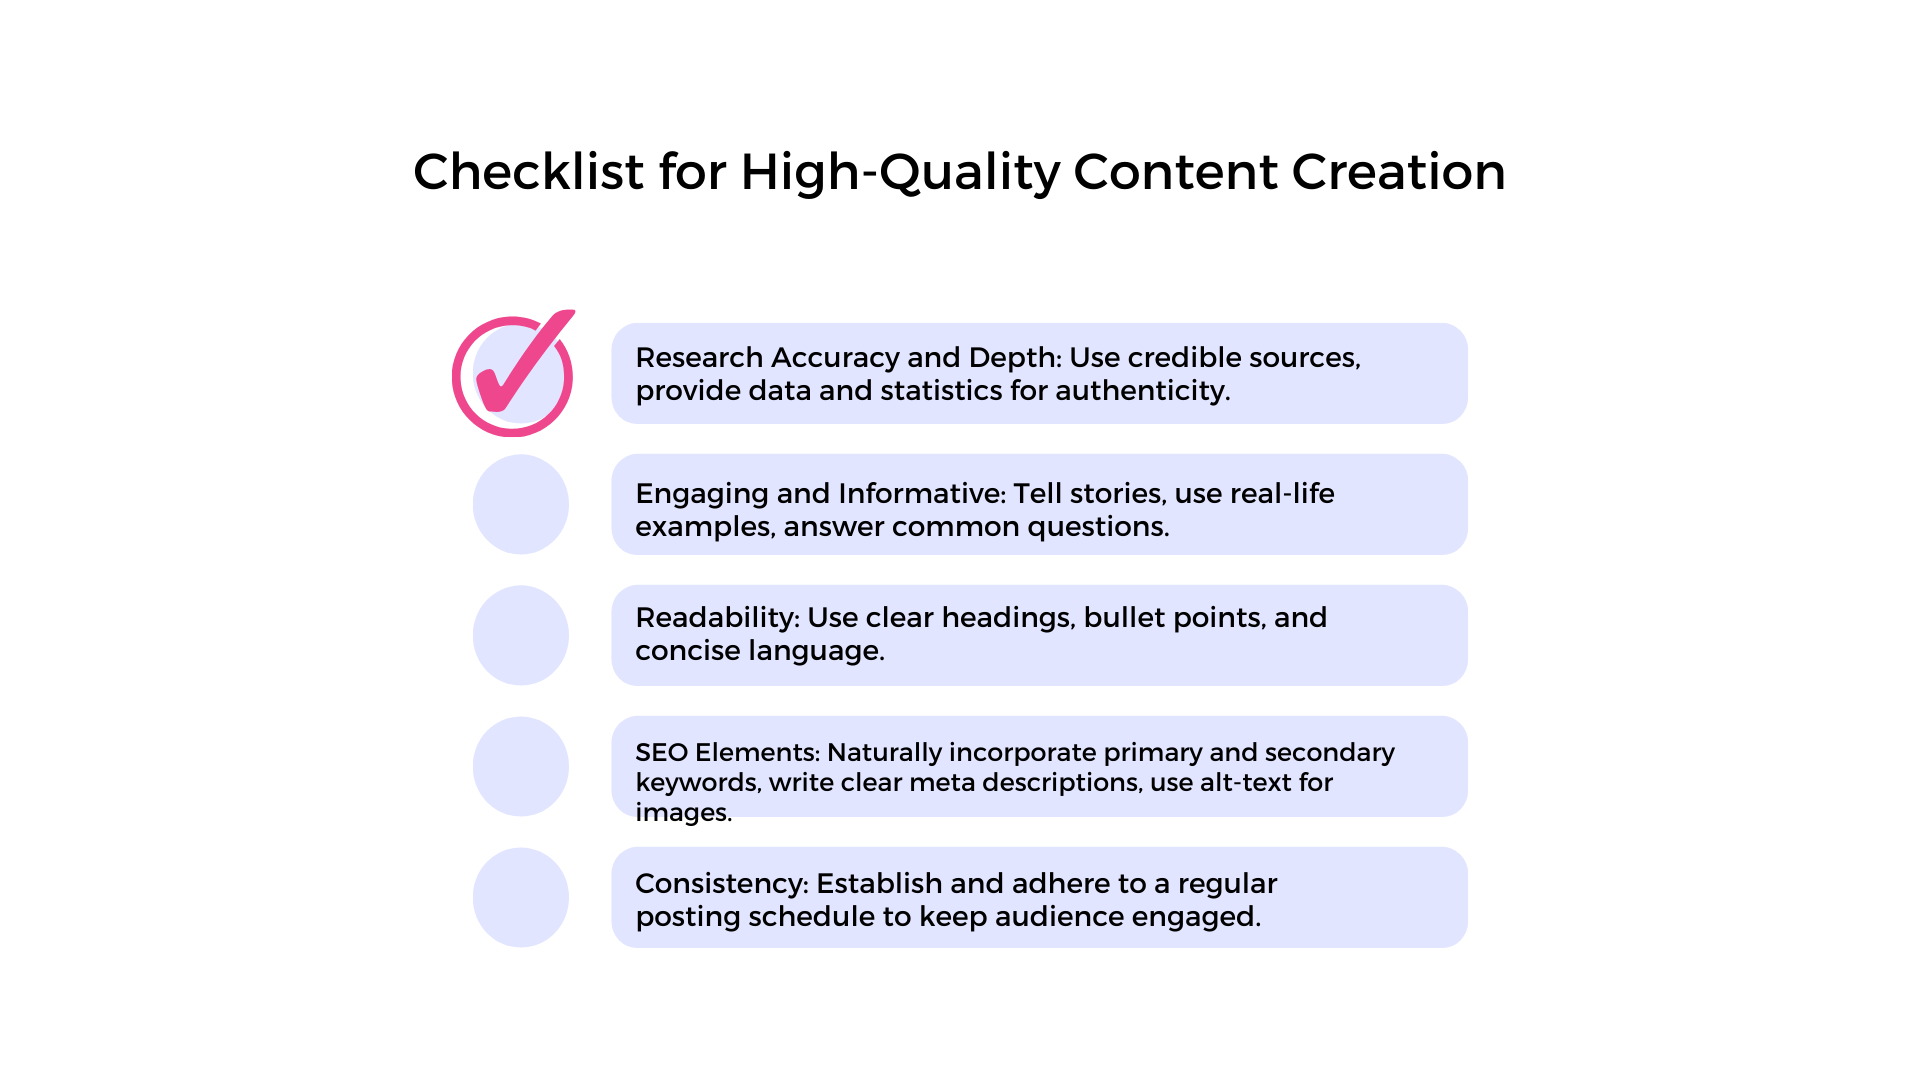 Checklist for creating high quality content